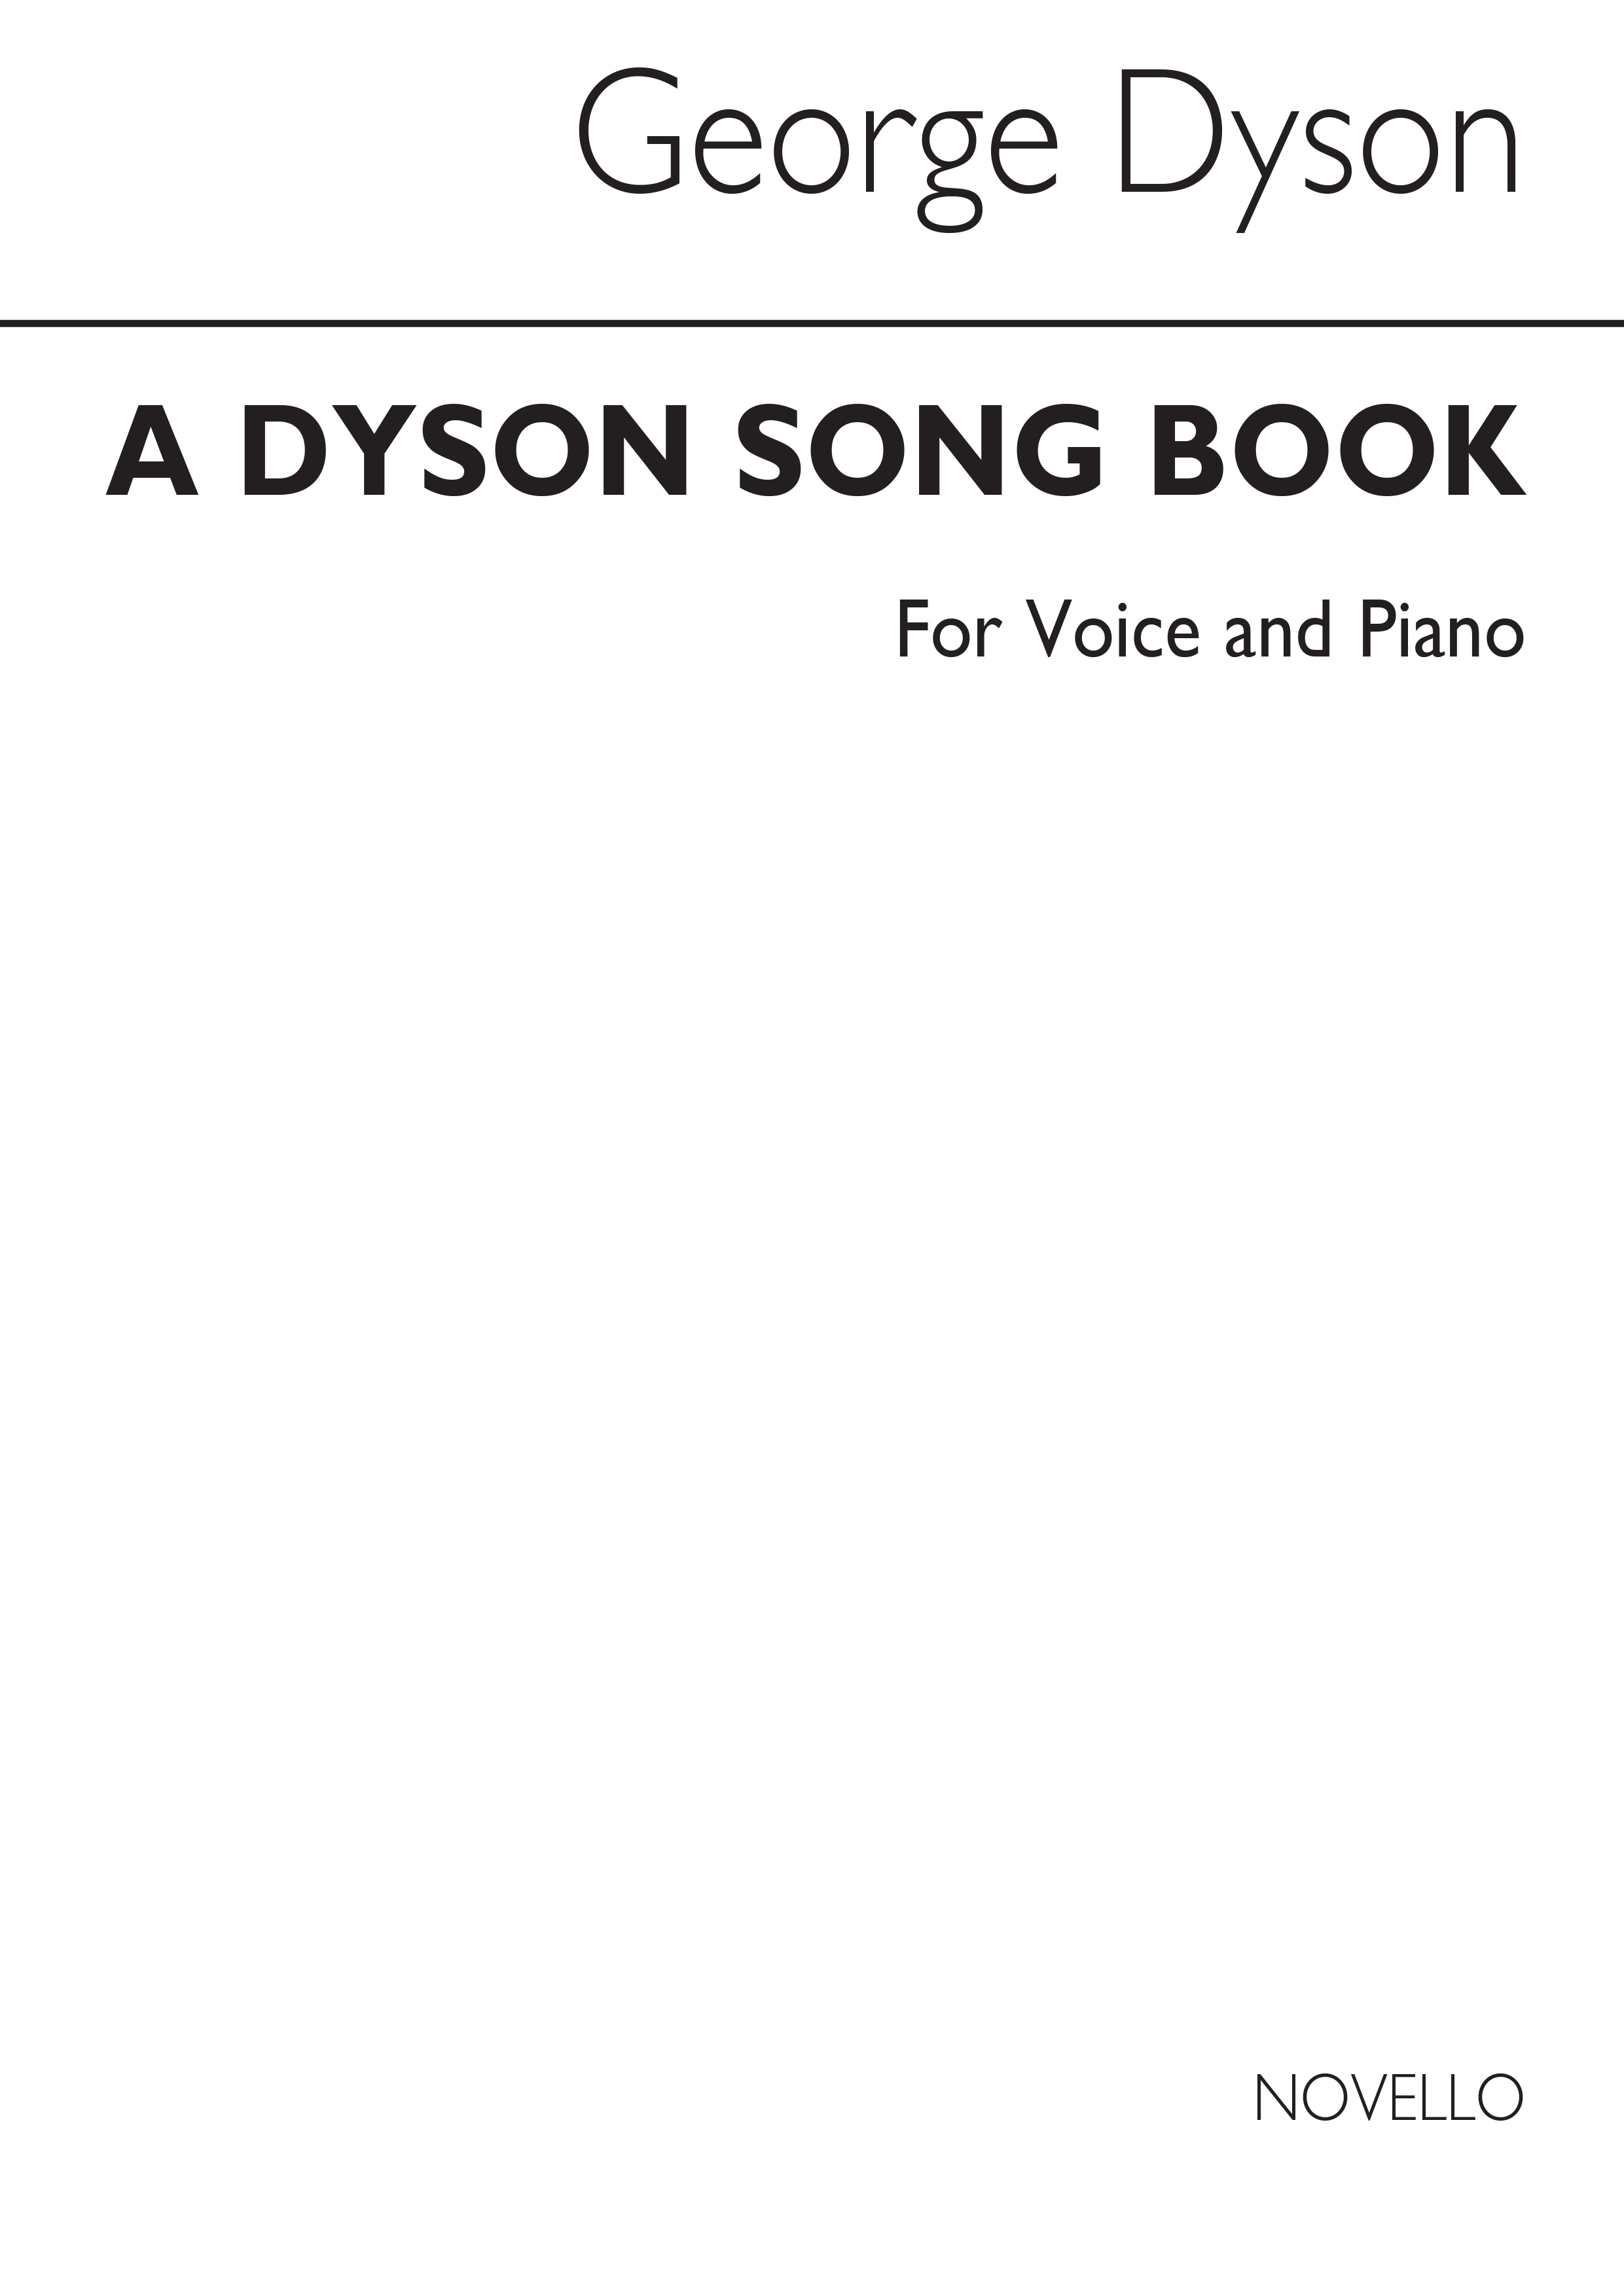 George Dyson: A Dyson Song Book for Voice and Piano